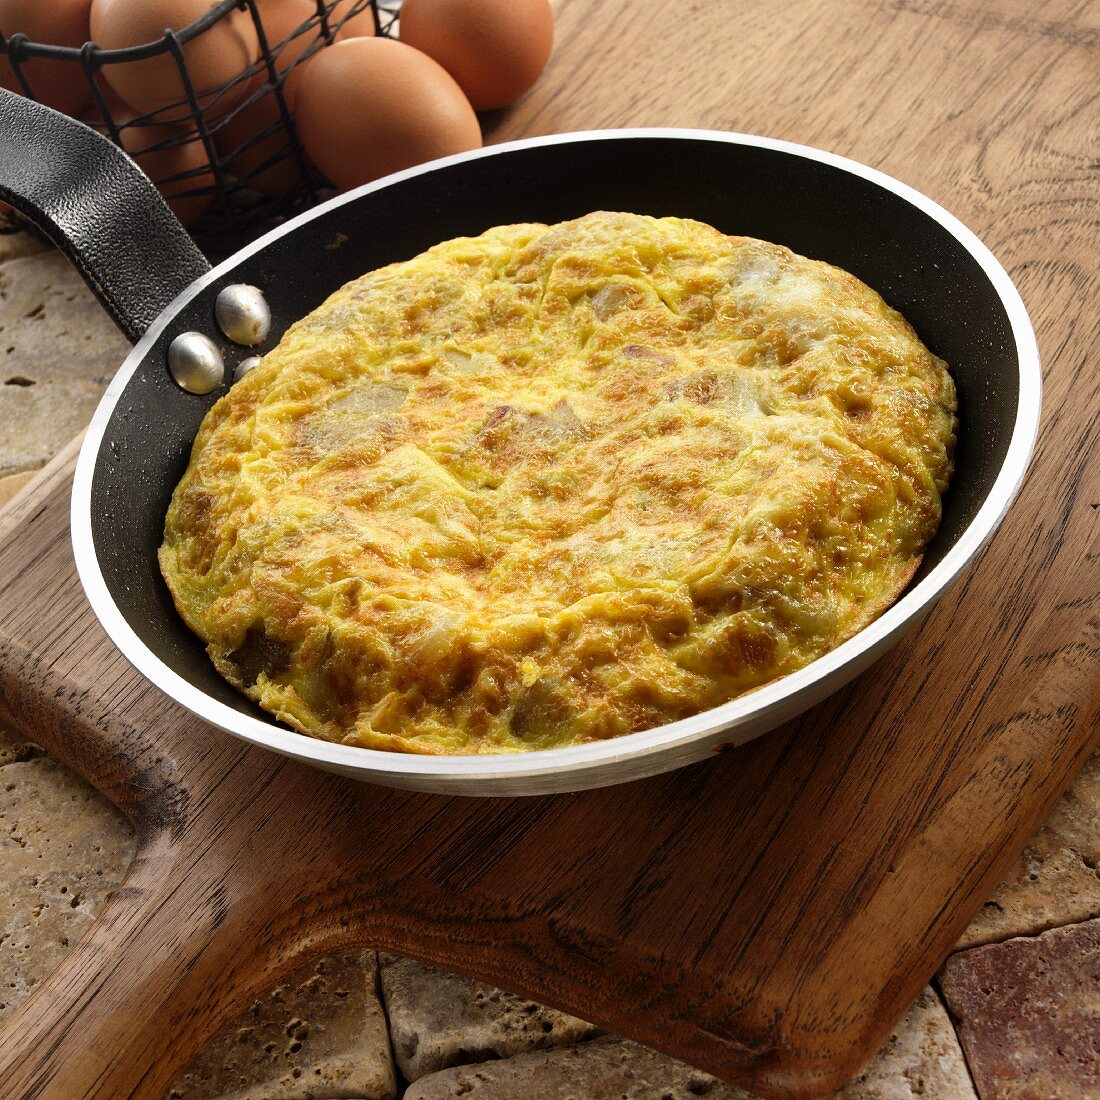 Tortilla Espanola (omelette made with eggs, potatoes and onions, Spain)